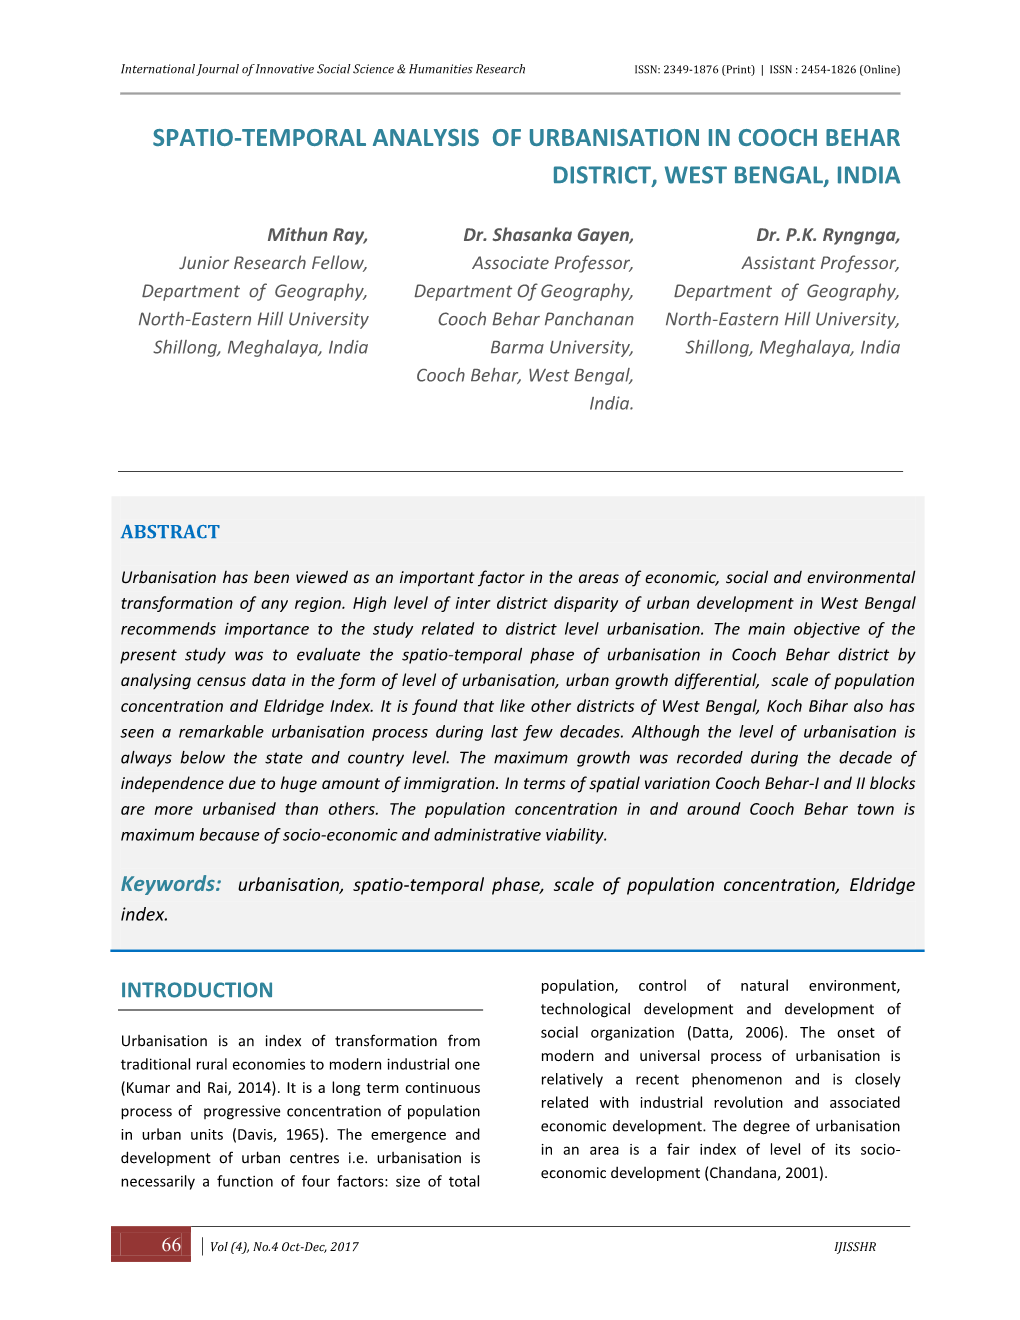 Spatio-Temporal Analysis of Urbanisation in Cooch Behar District, West Bengal, India